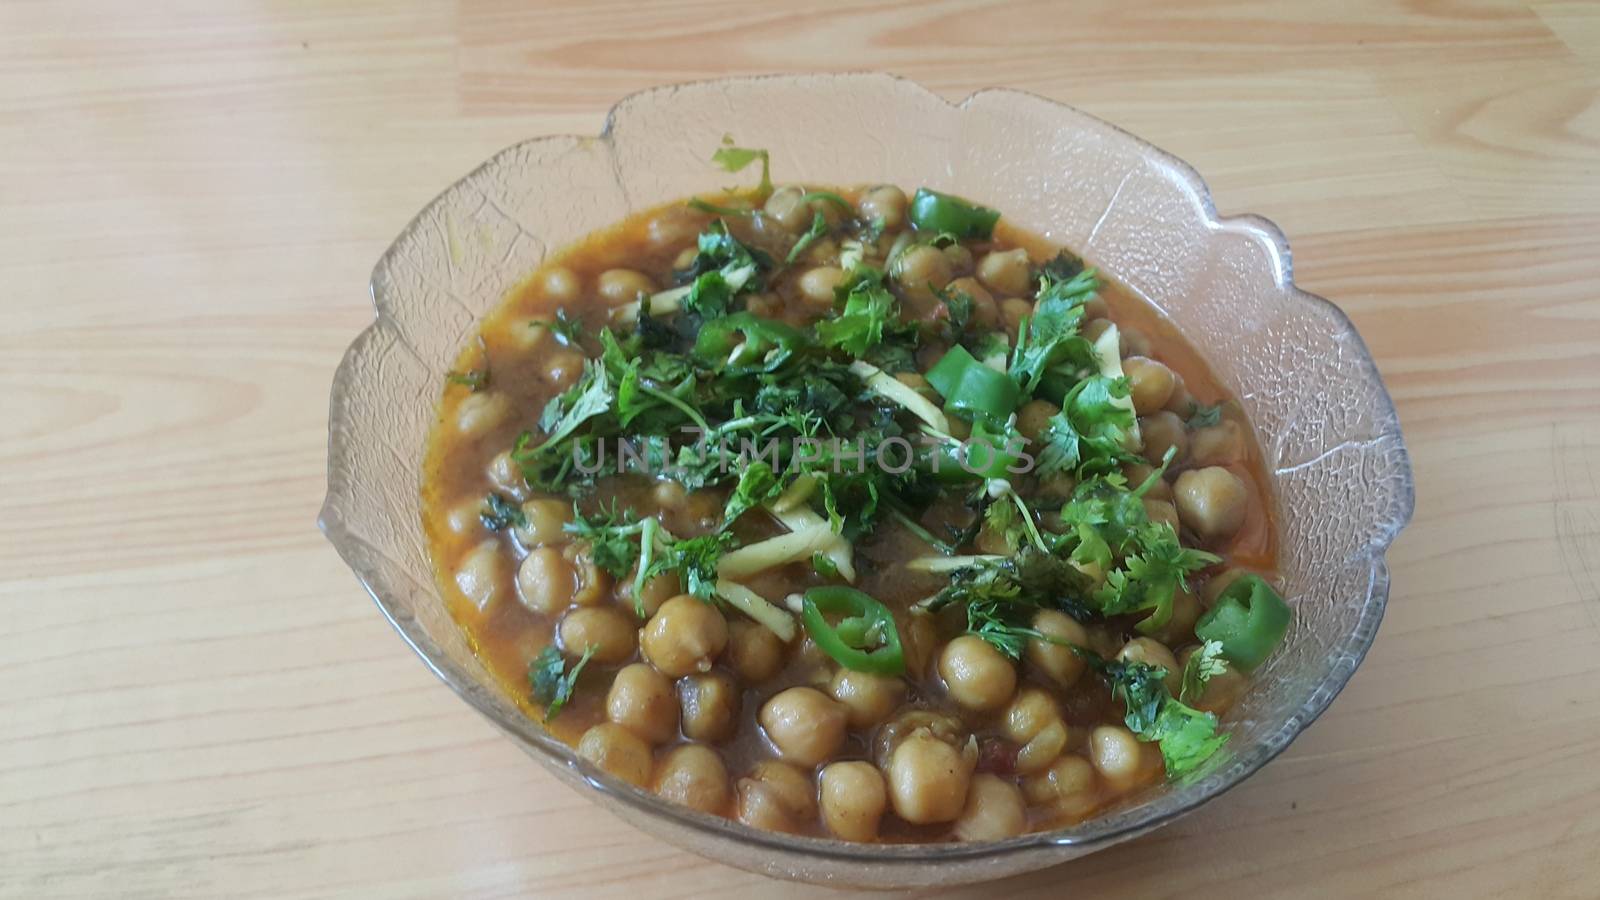 Home made dish served in glass bowl garnished with sliced onion and green coriander leaf and placed over wooden floor .Traditional lentils Channa Masala or chickpeas curry or chole bhature.